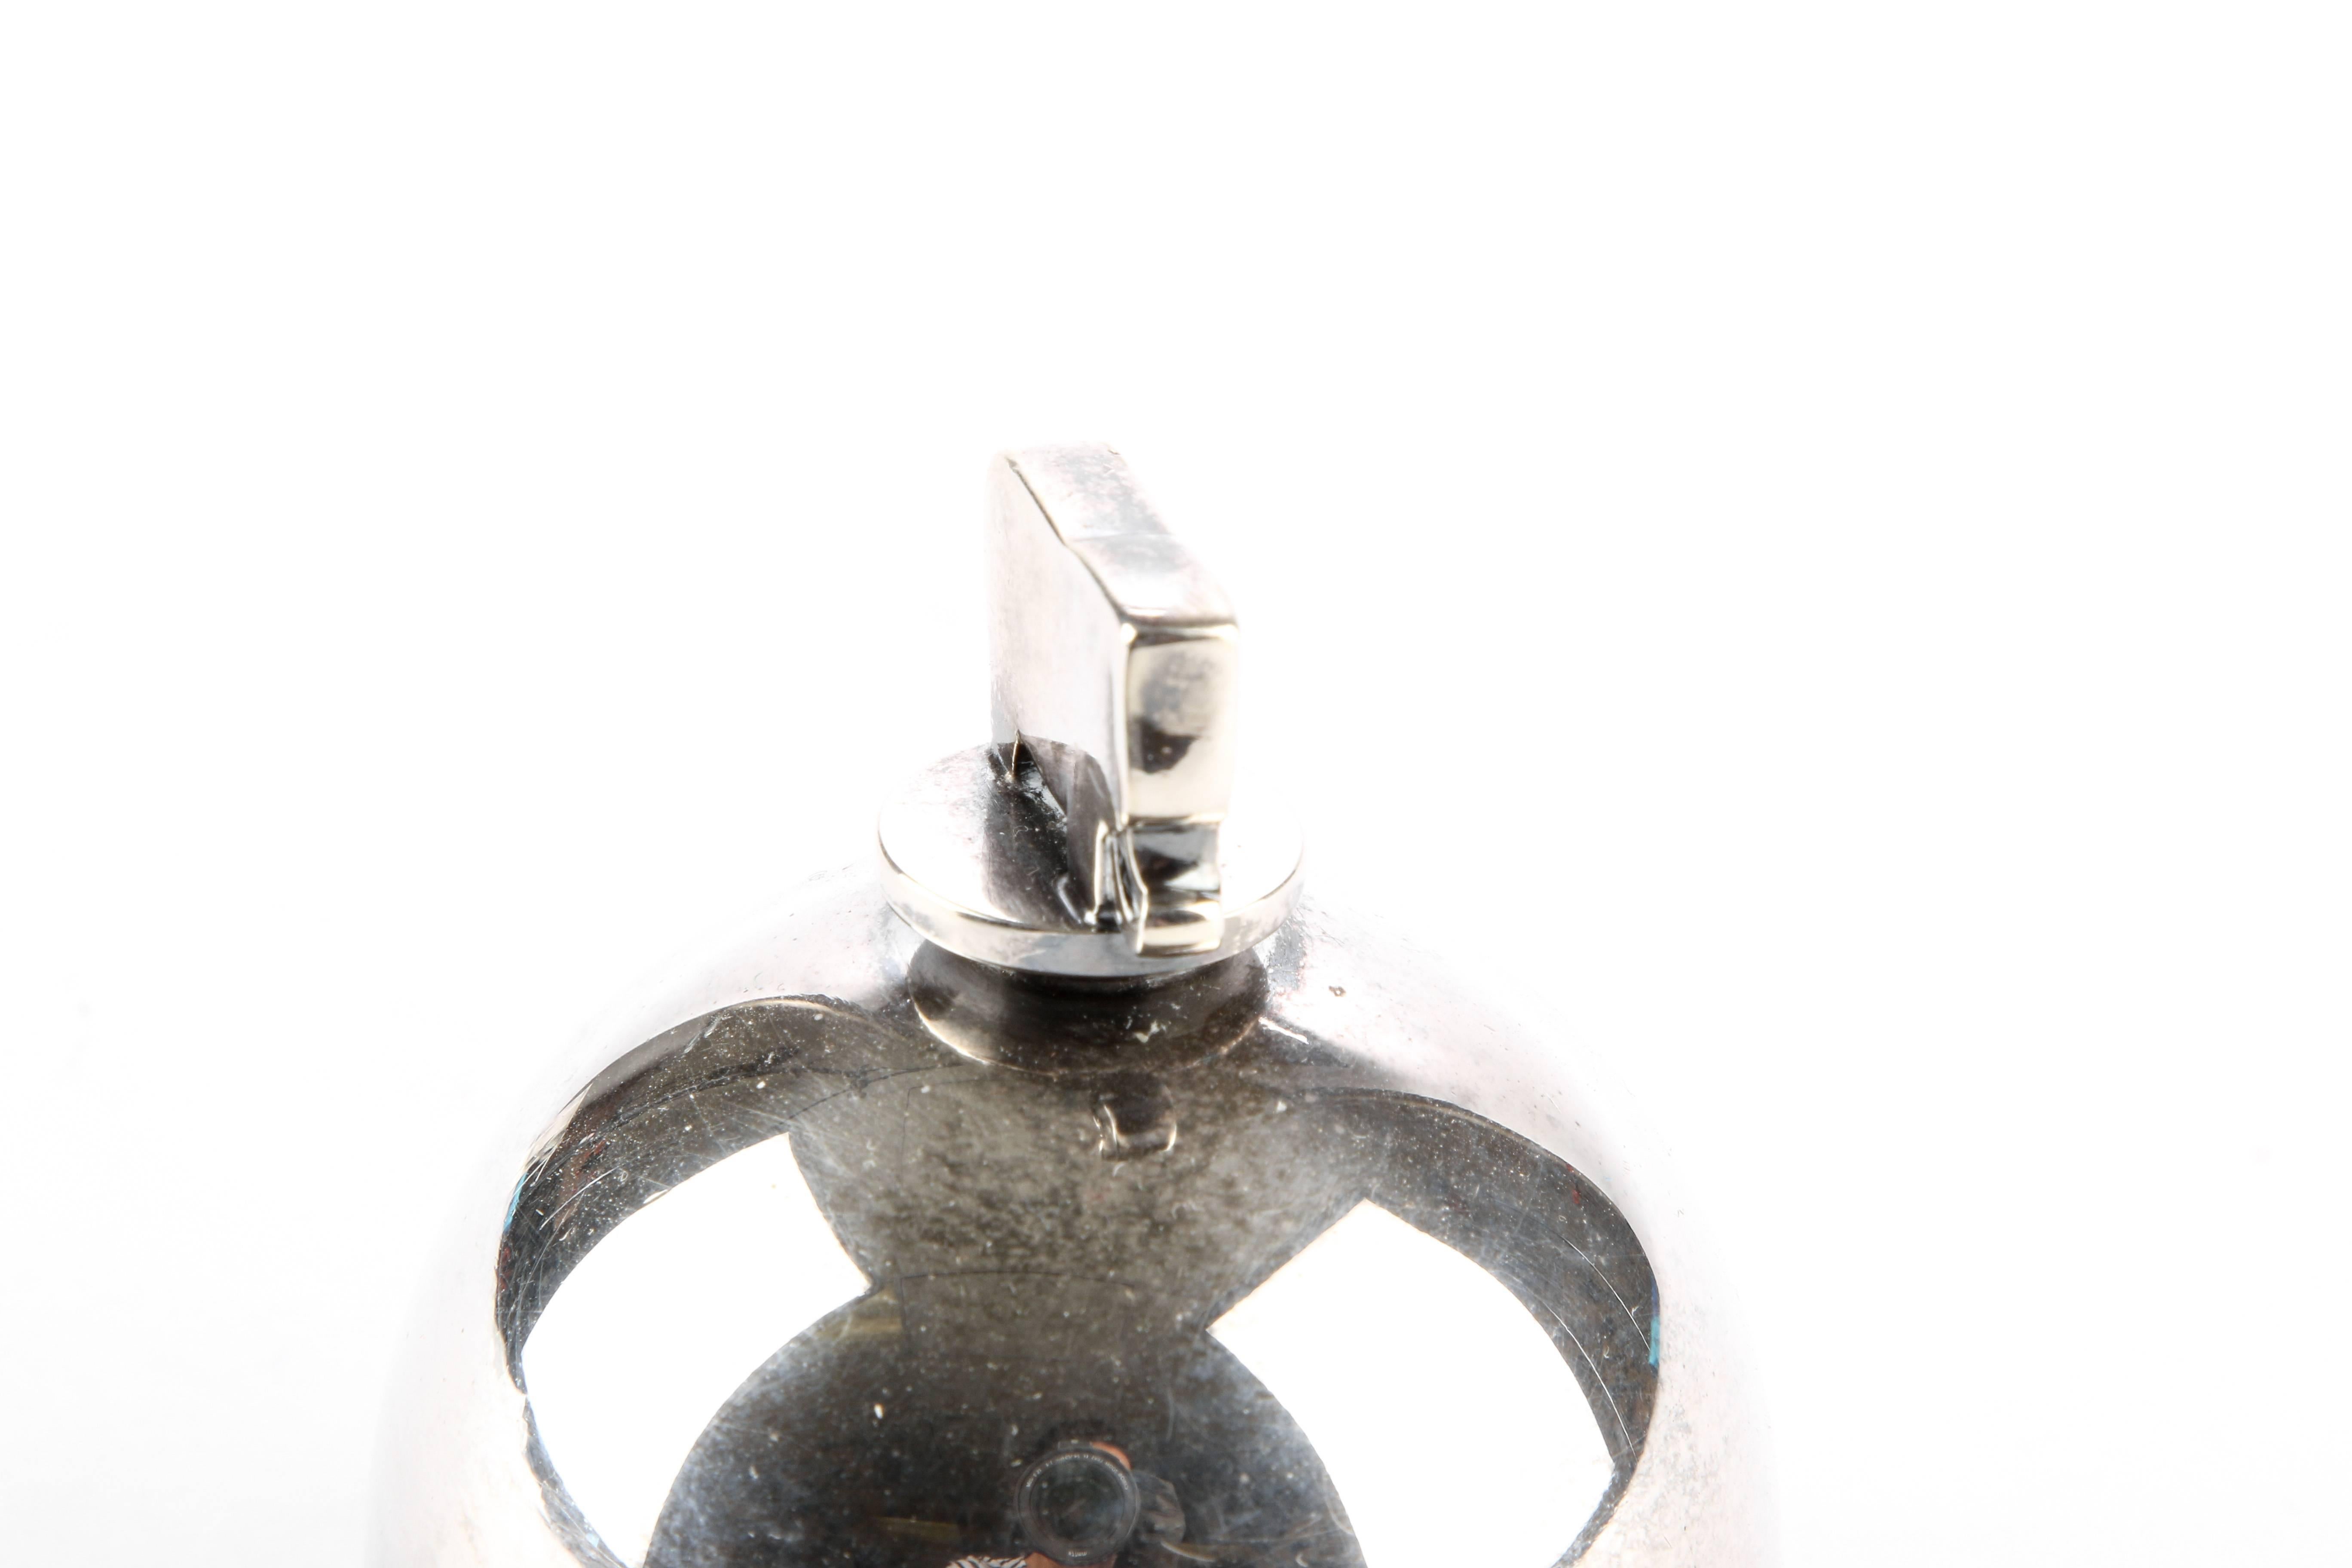 Georg Jensen, Denmark dinner bell having dual recessed bands, solid silver elephant finial and an elongated teardrop clanger.
Identifying marks: Georg Jensen within an oval dotted circle, Sigvaard in script, sterling, #219

Condition: slightly